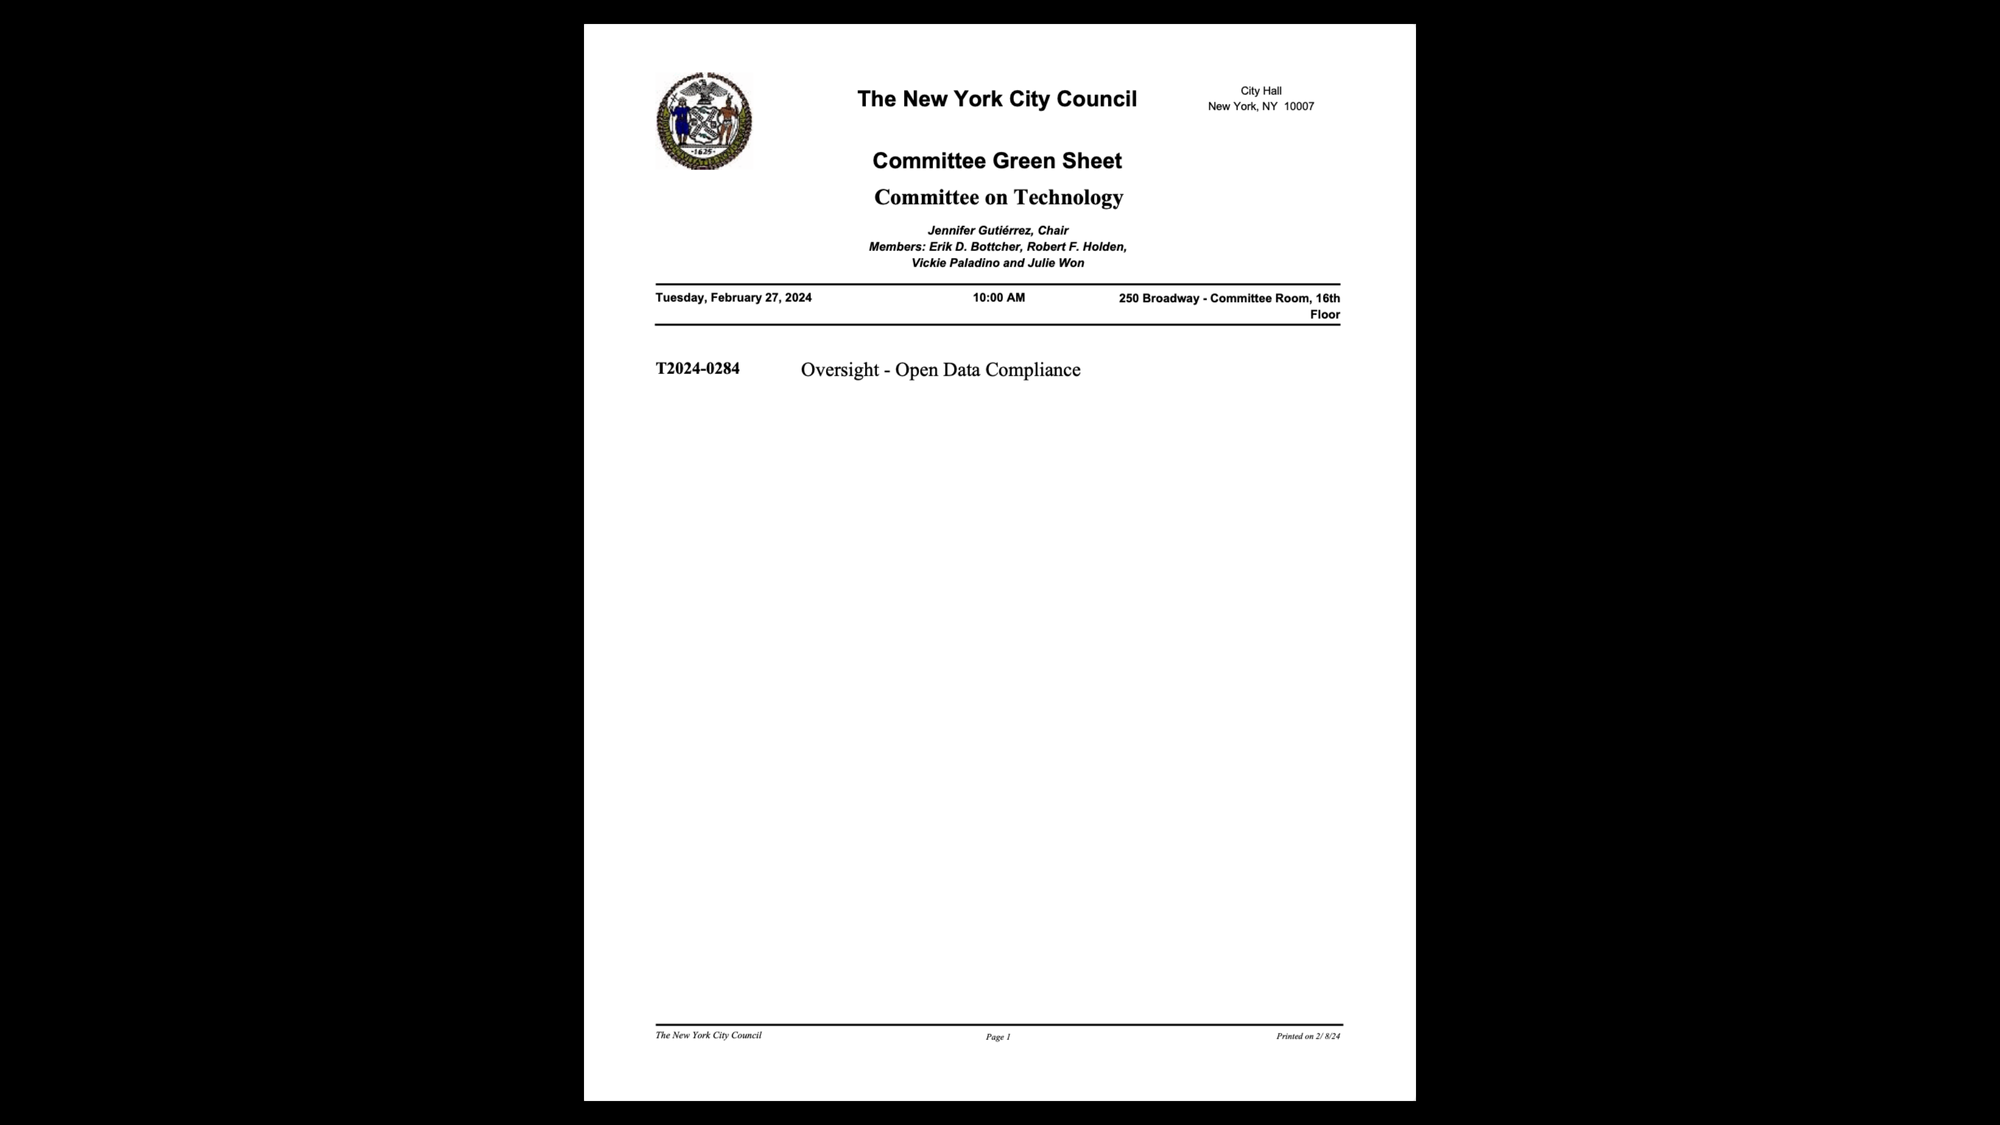 A screenshot of a PDF agenda of a Committee on Technology meeting on Open Data Compliance in the NYC city council. The meeting agenda states T2024-0284 Oversight - Open Data Compliance